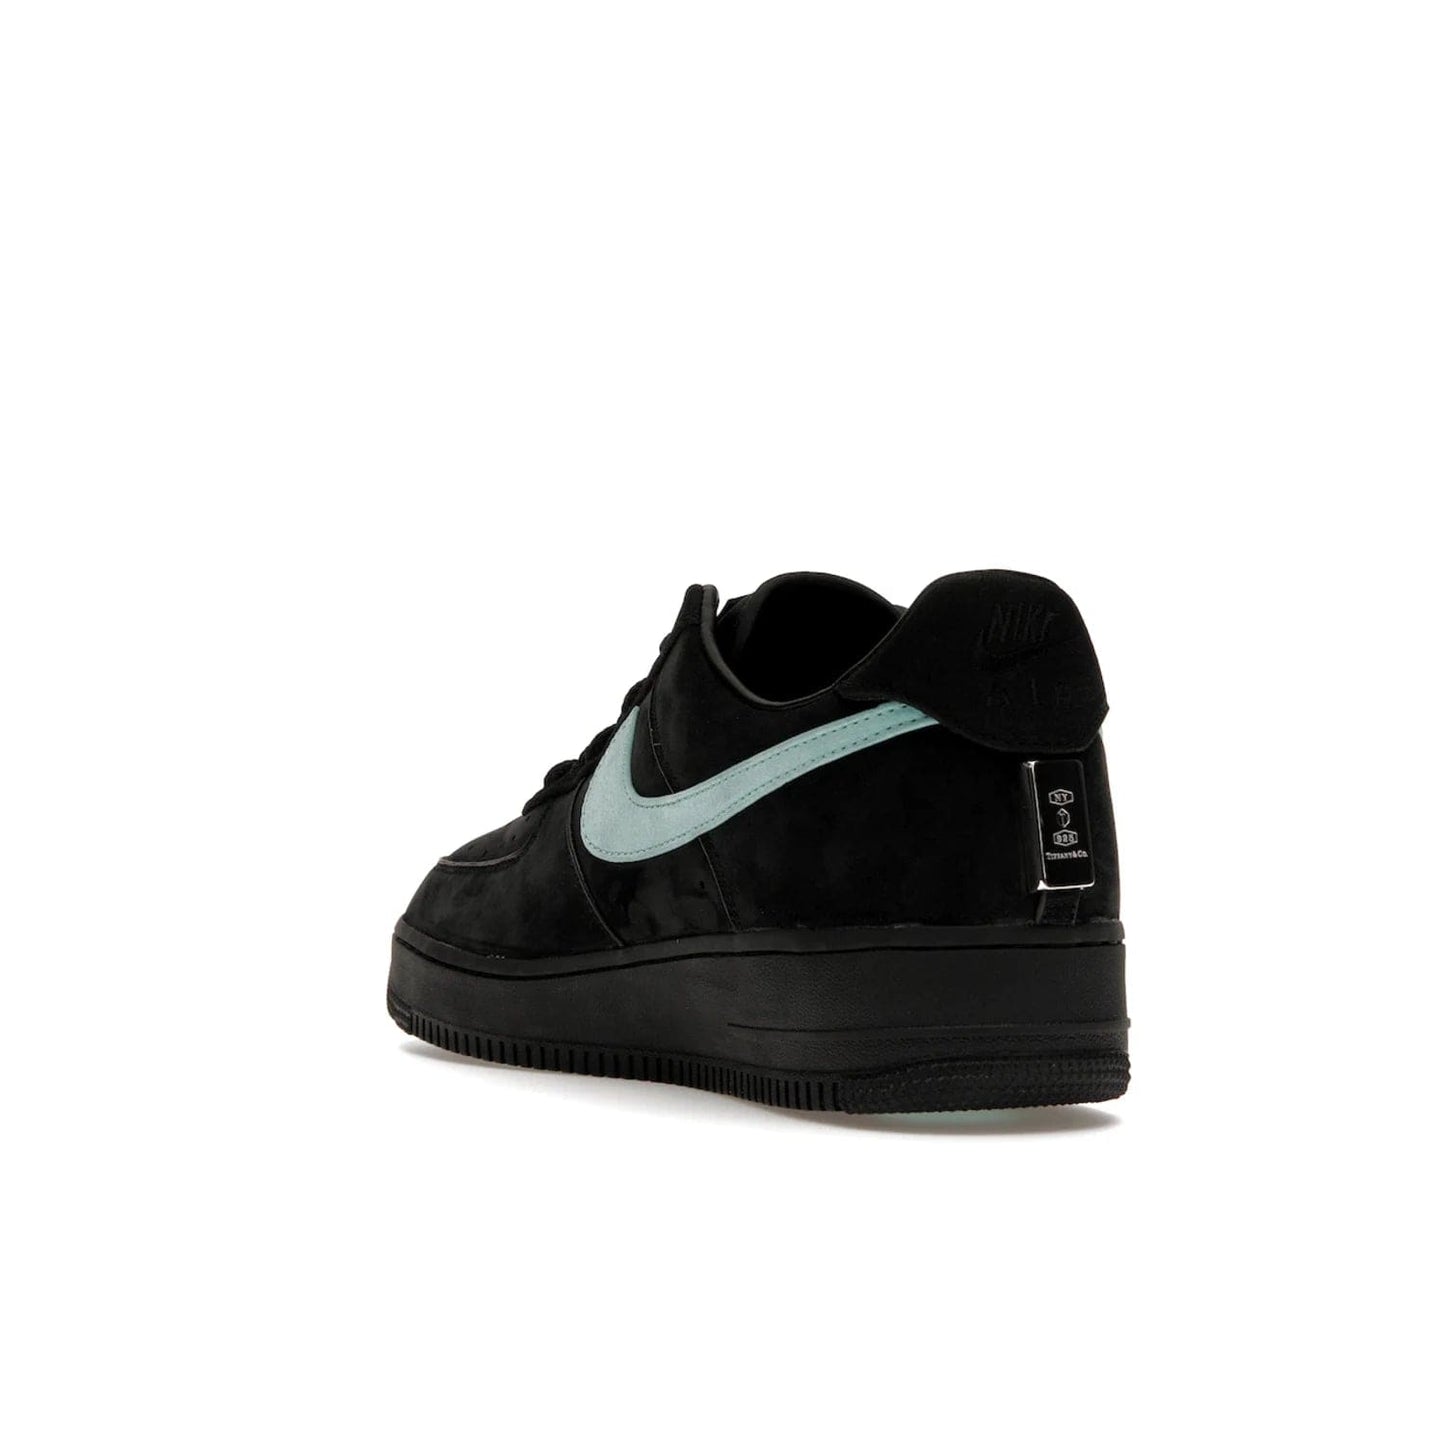 Nike Air Force 1 Low Tiffany & Co. 1837 - Image 25 - Only at www.BallersClubKickz.com - Nike & Tiffany & Co. collaborate on an exclusive sterling silver sneaker, the Air Force 1 Low Tiffany & Co. 1837. Featuring a suede uppr, Tiffany Blue Swoosh and "Tiffany" cursive branding, this pair of AF1s offers an opulent fusion of athleisure and luxury fashion. Release date March 2023.